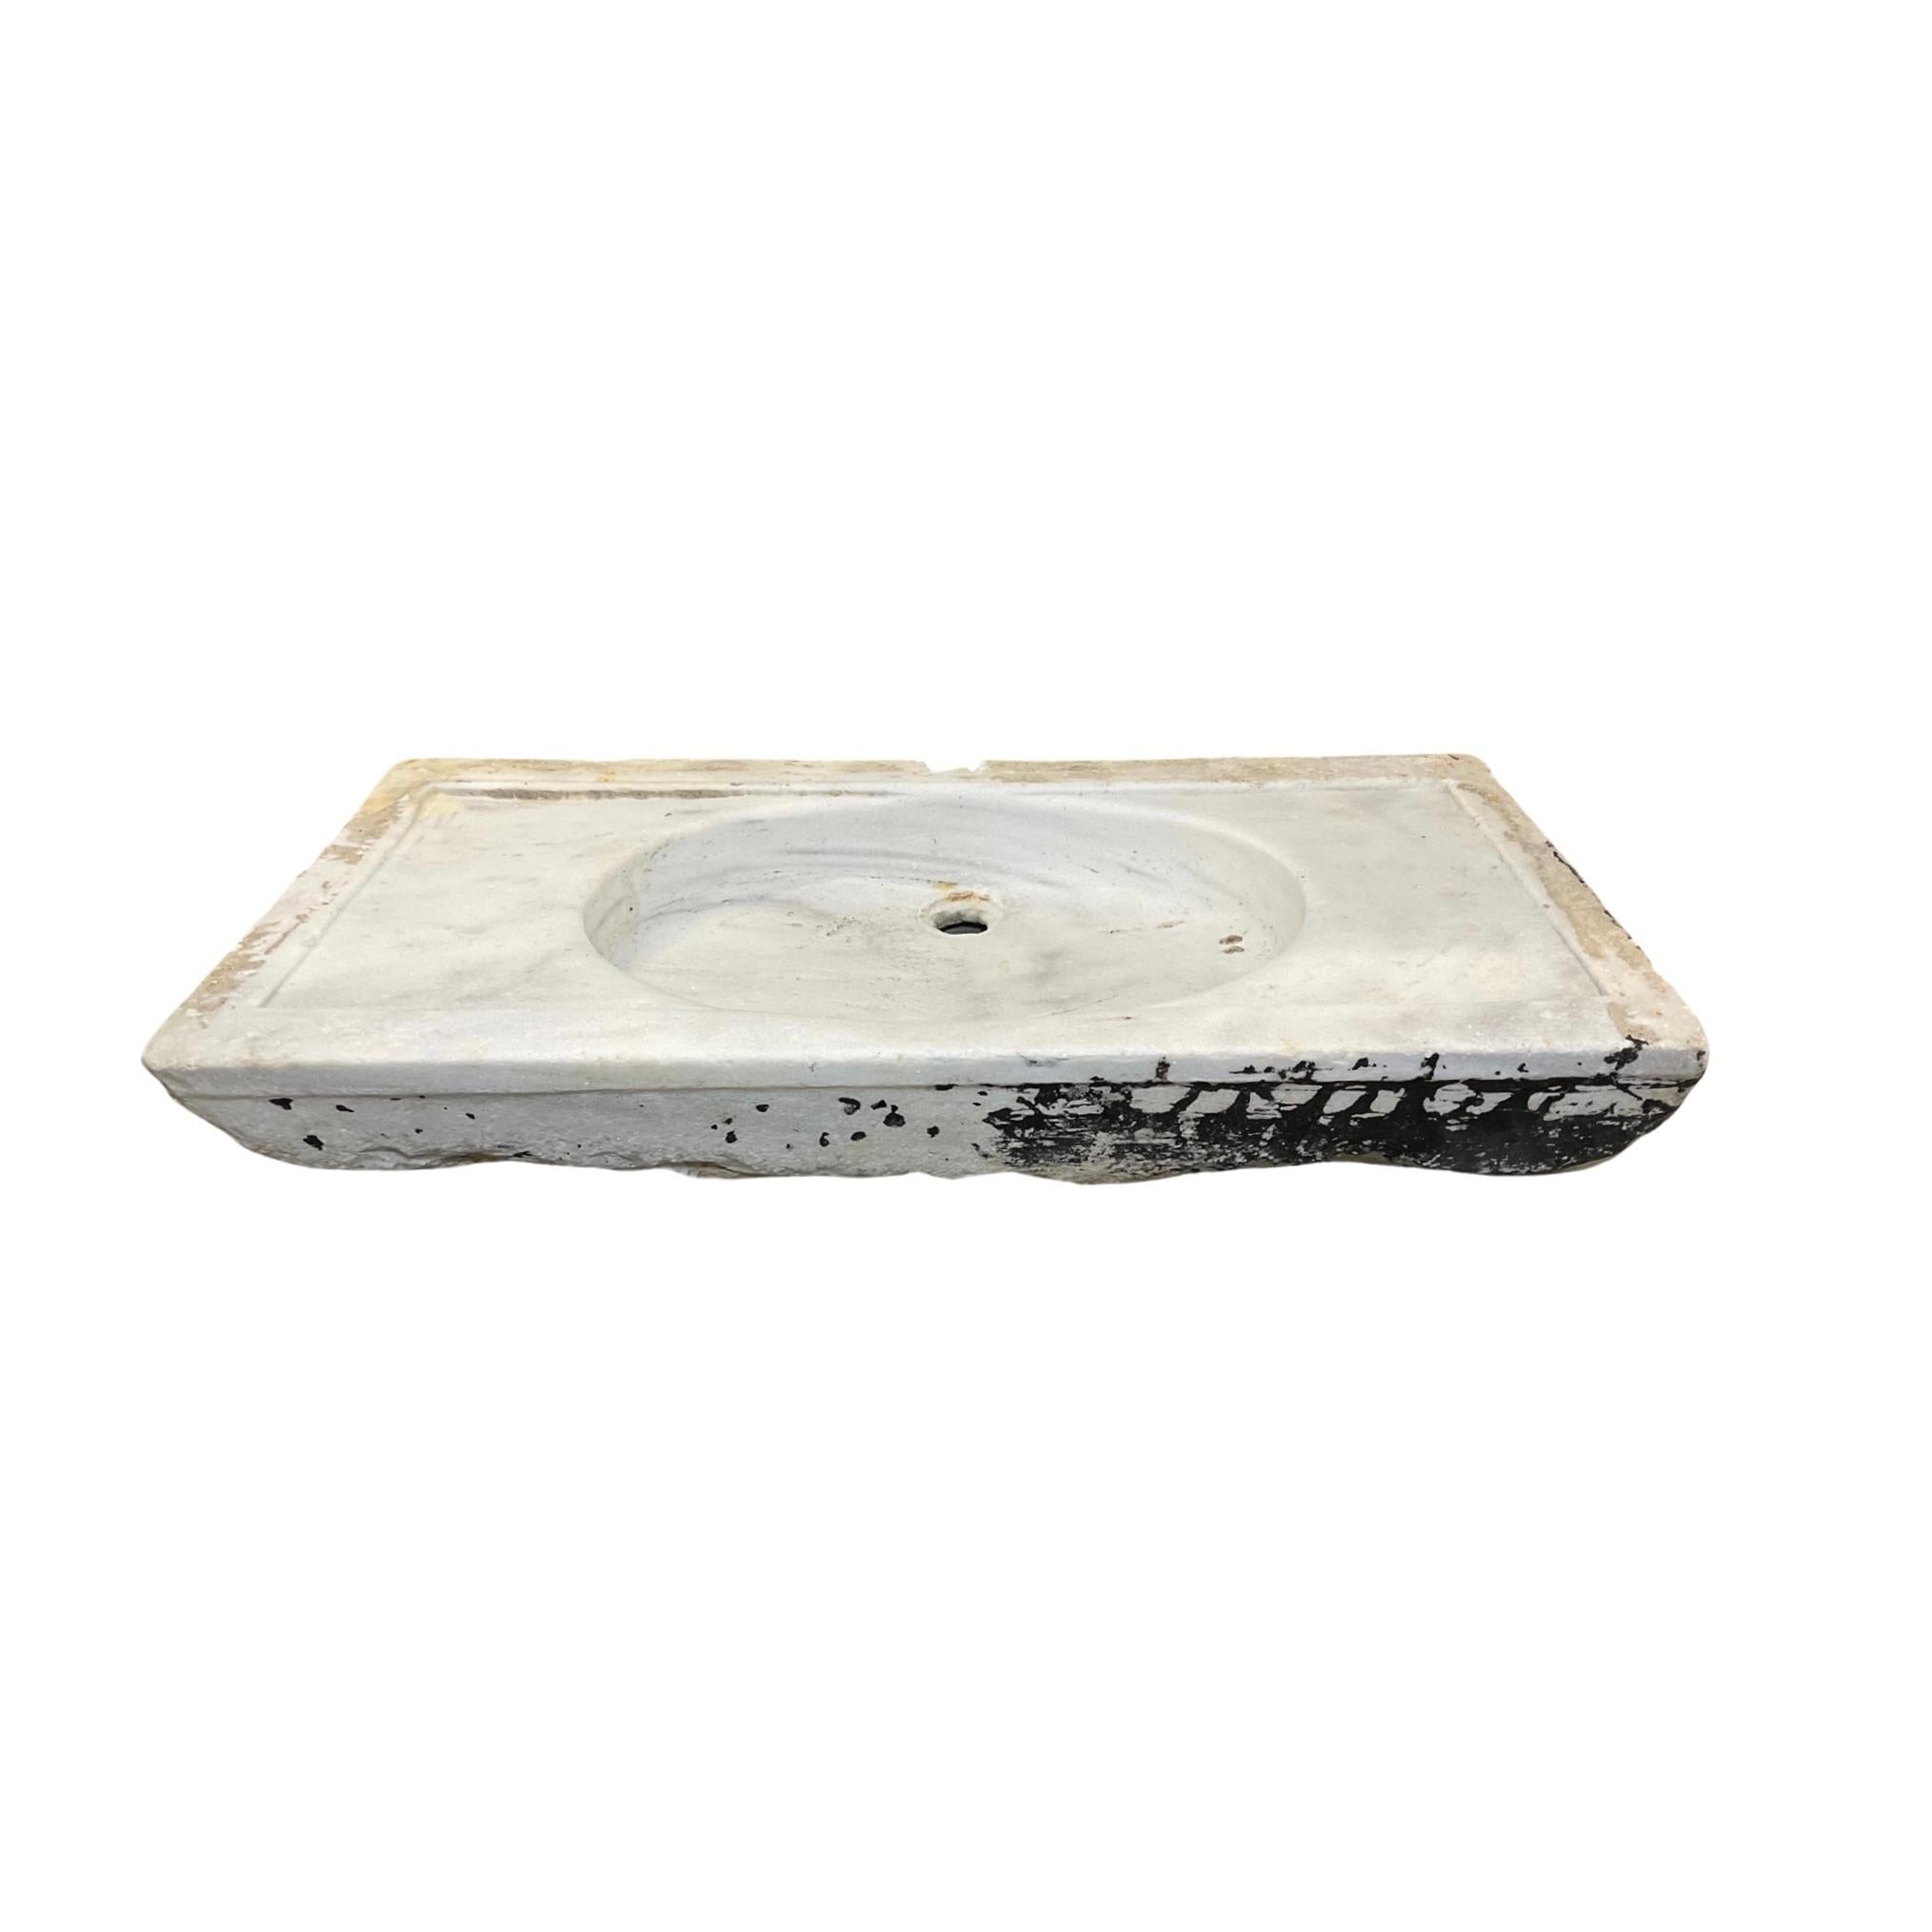 This French White Marble Sink is stylish and elegant with a nostalgic charm from its 17th century design. Carved from natural marble, its timeless beauty and durability are sure to add luxury to any bathroom.

 

